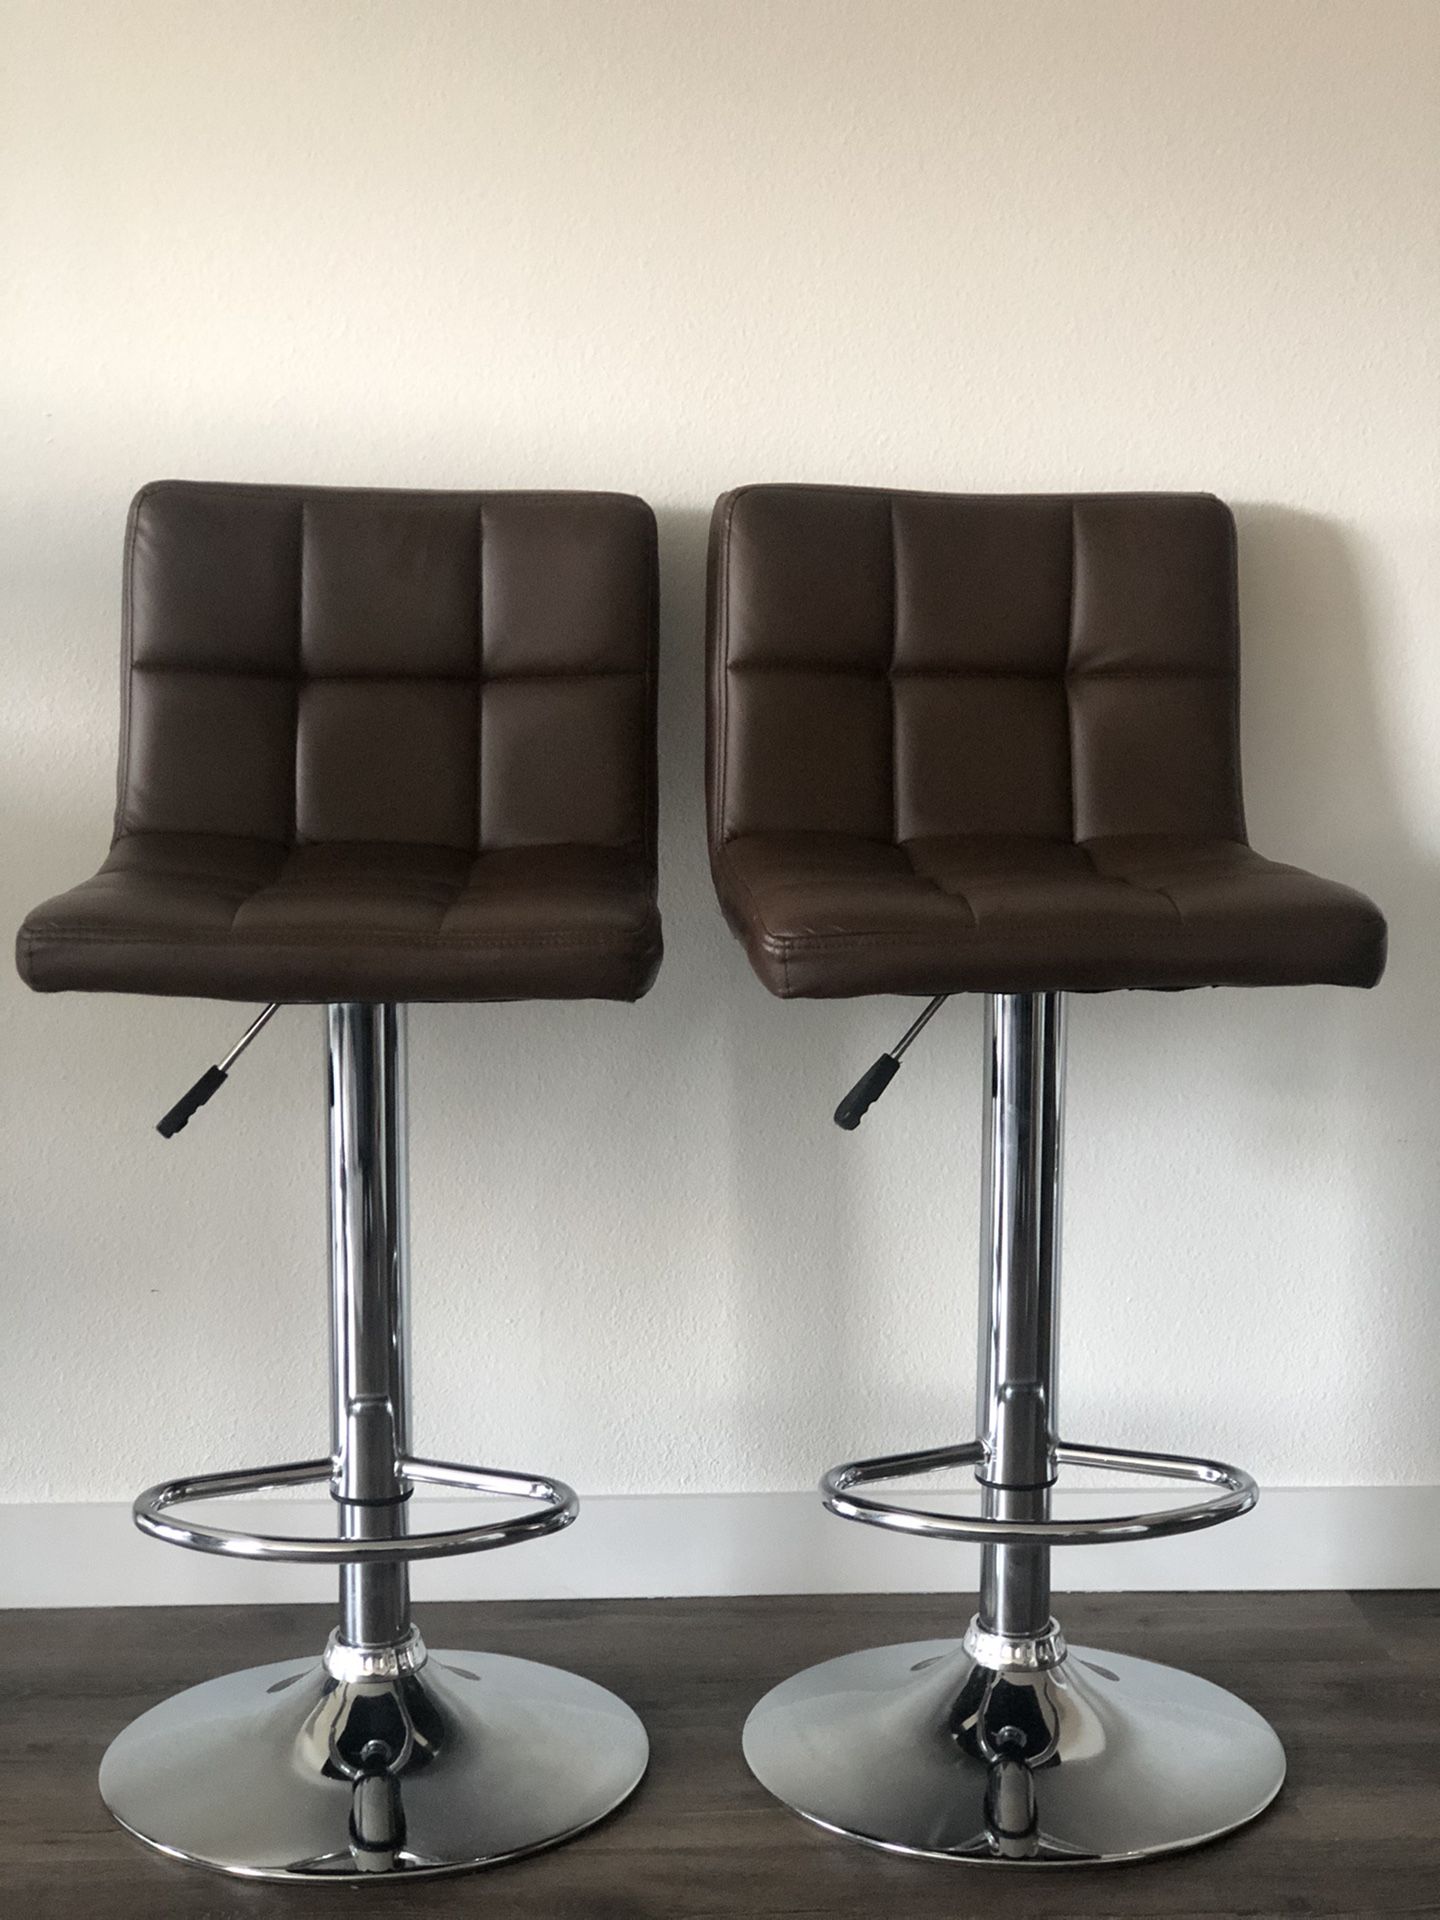 2 stools,synthetic leather, brown color